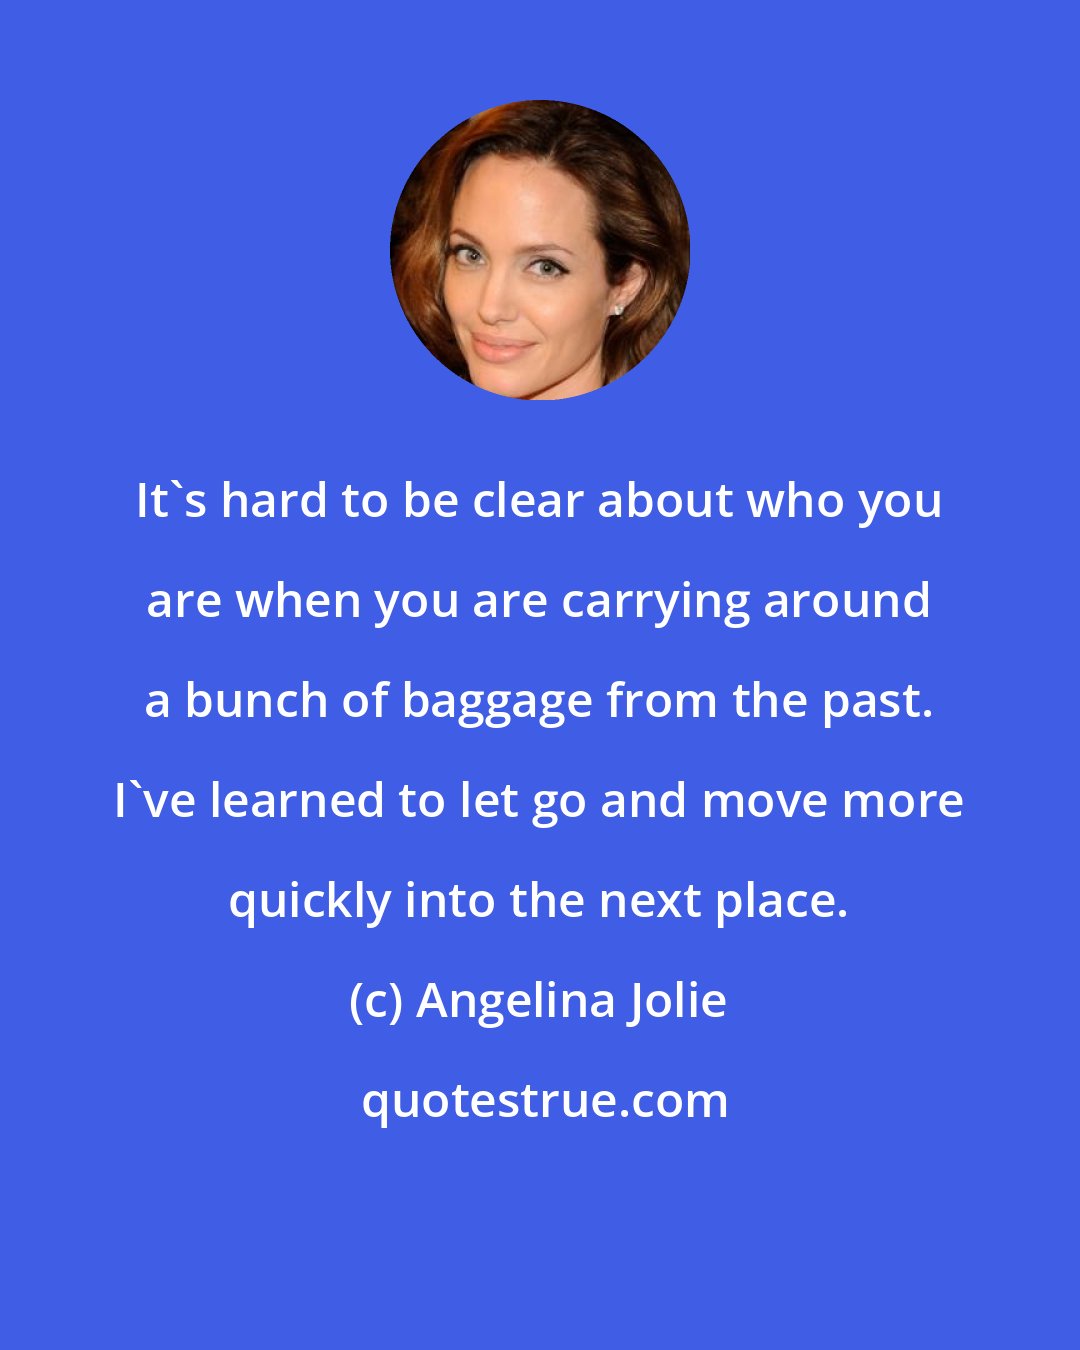 Angelina Jolie: It's hard to be clear about who you are when you are carrying around a bunch of baggage from the past. I've learned to let go and move more quickly into the next place.